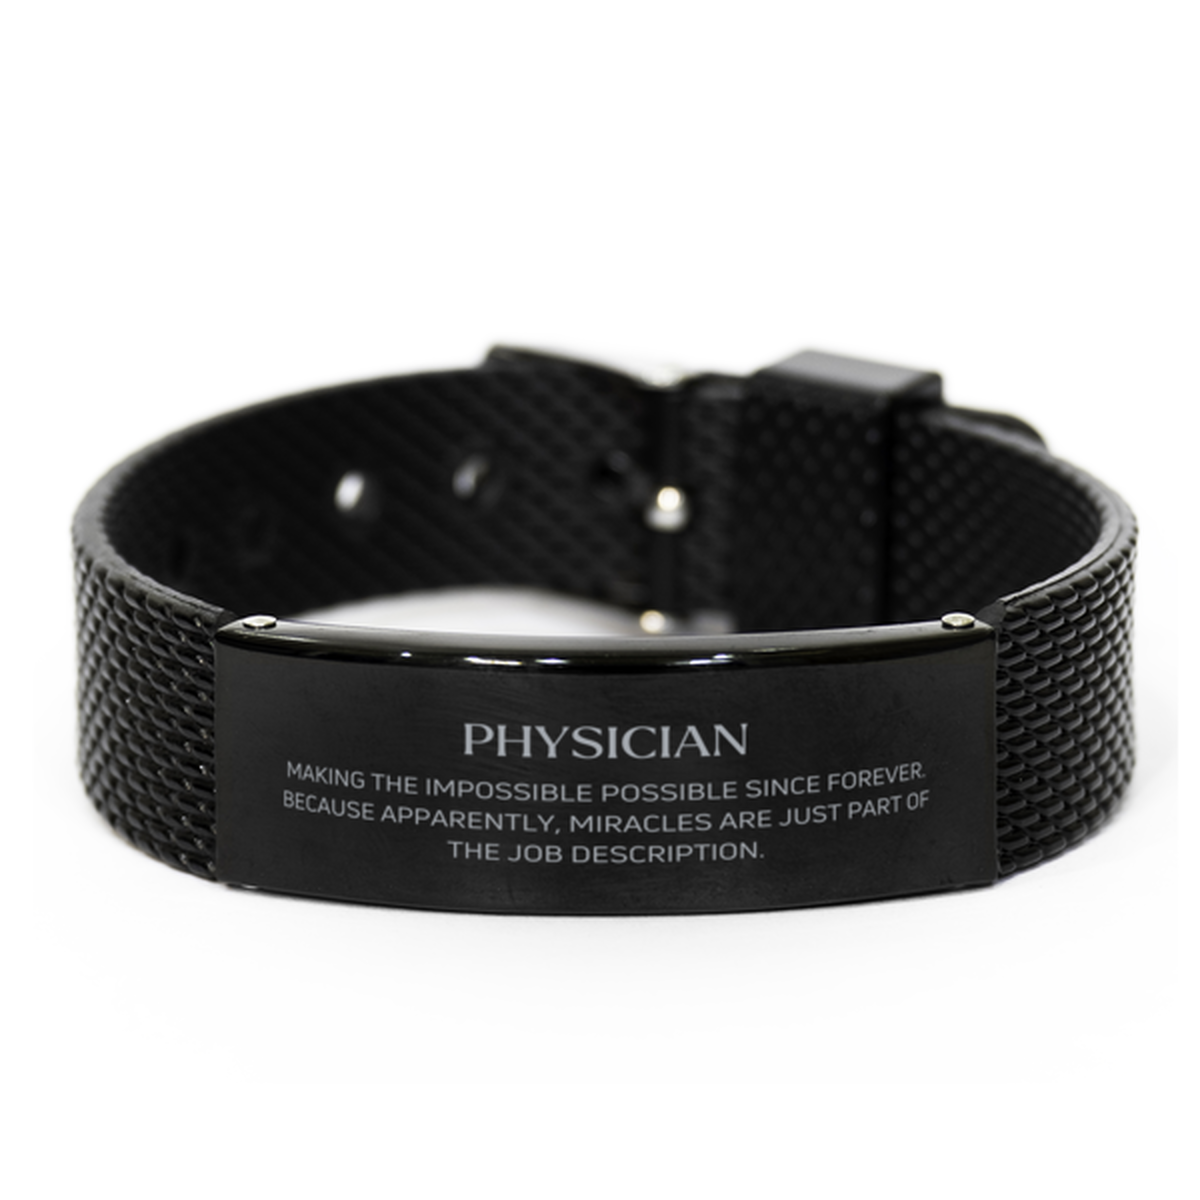 Funny Physician Gifts, Miracles are just part of the job description, Inspirational Birthday Black Shark Mesh Bracelet For Physician, Men, Women, Coworkers, Friends, Boss